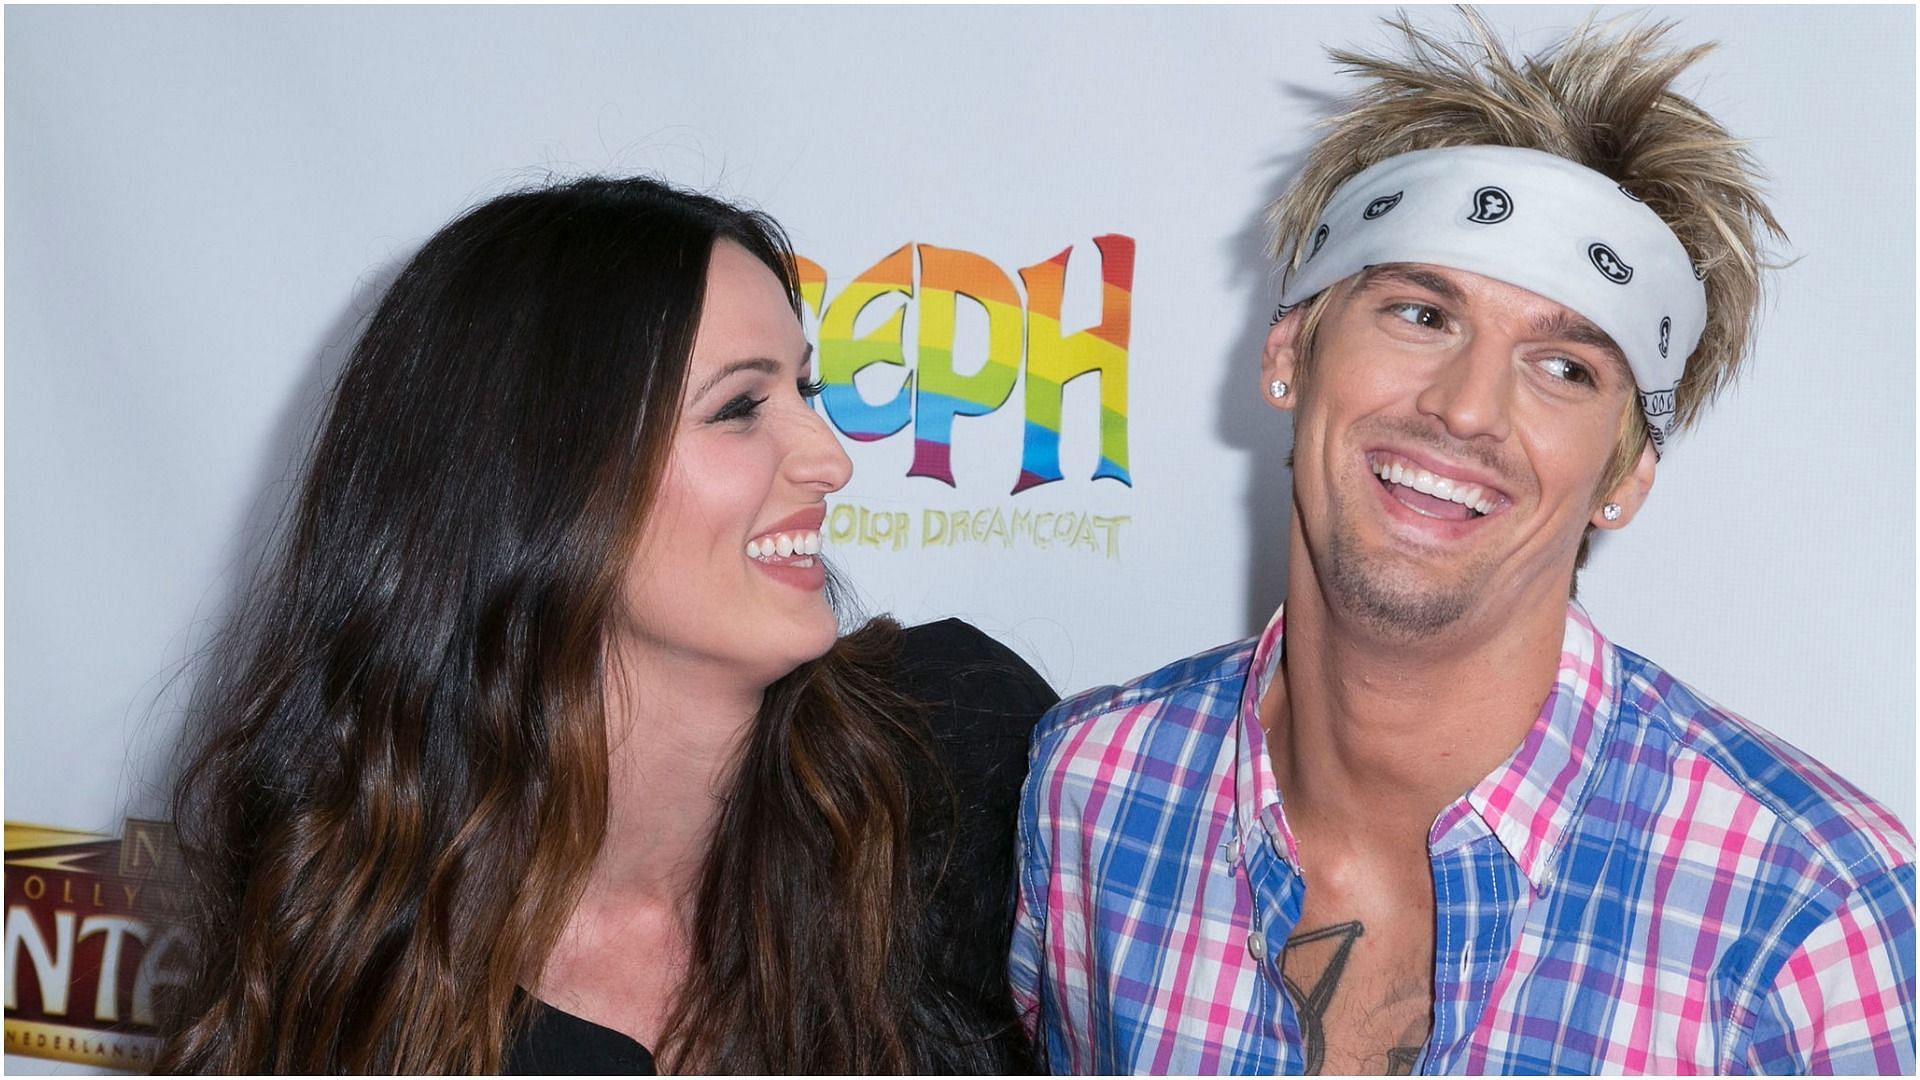 Aaron Carter with his sister Angel Carter (Image by Vincent Sandoval via Getty Images)